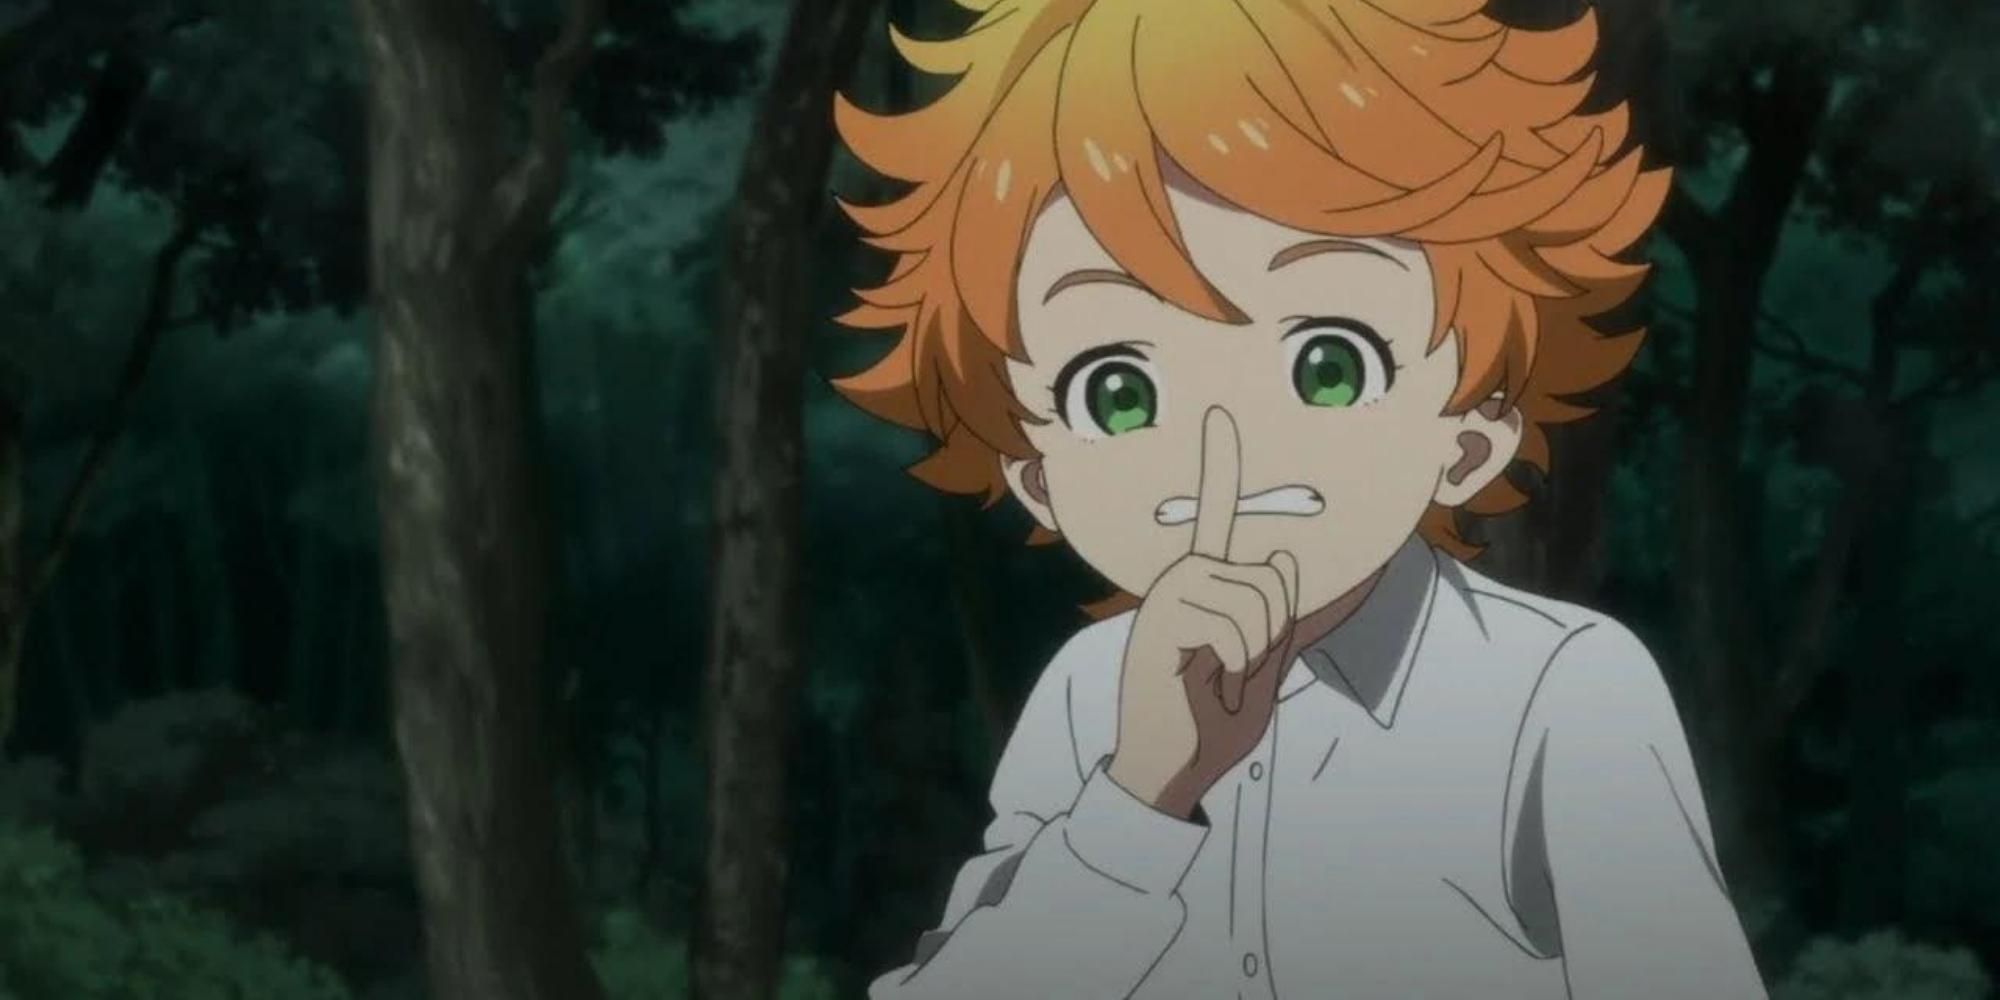 Emma in The Promised Neverland